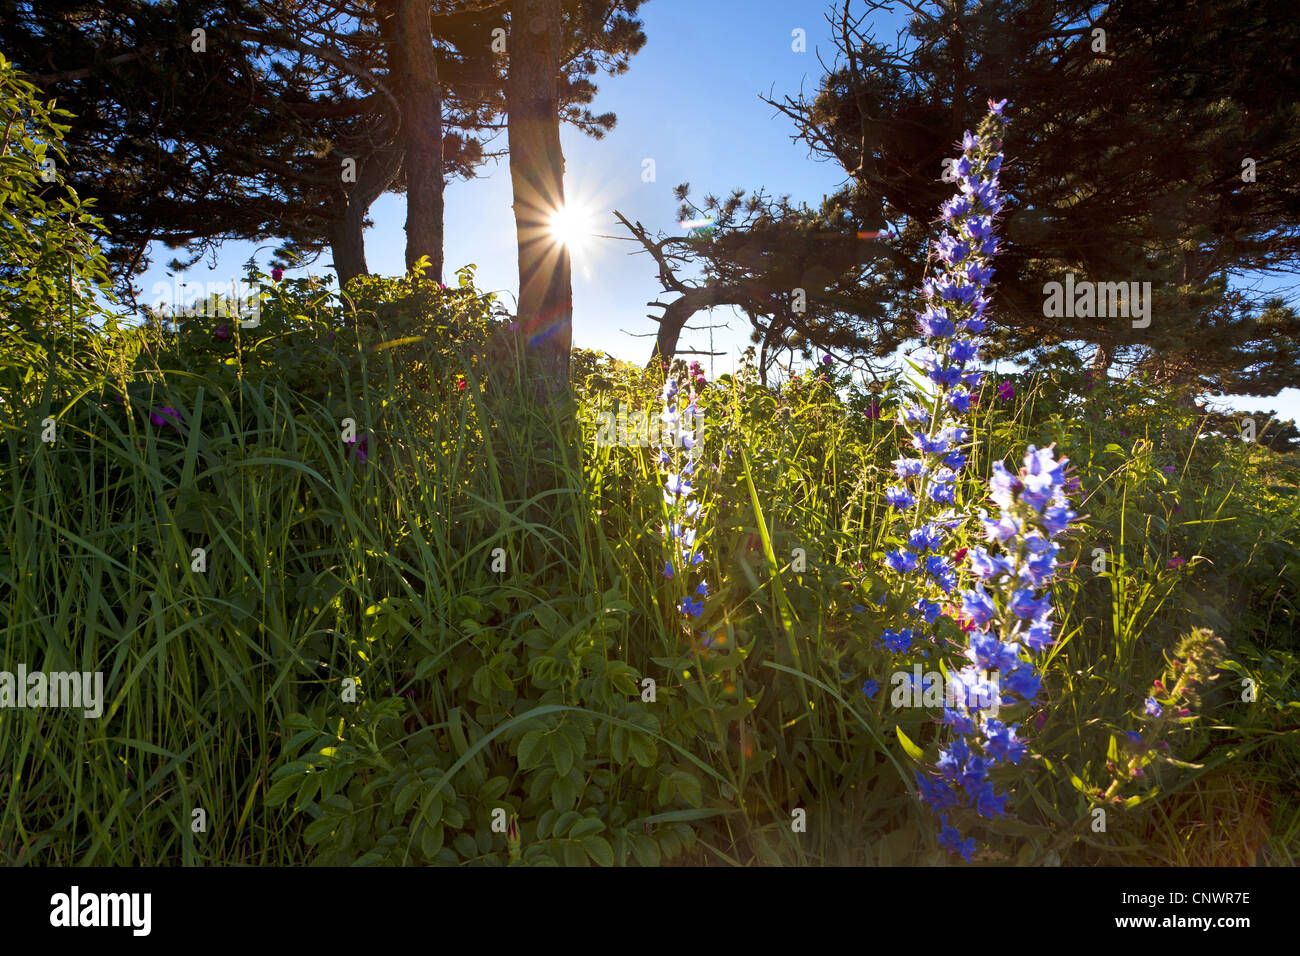 blueweed, blue devil, viper's bugloss, common viper's-bugloss (Echium vulgare), in backlight among trees and grass, Germany, Mecklenburg-Western Pomerania, Hiddensee Stock Photo